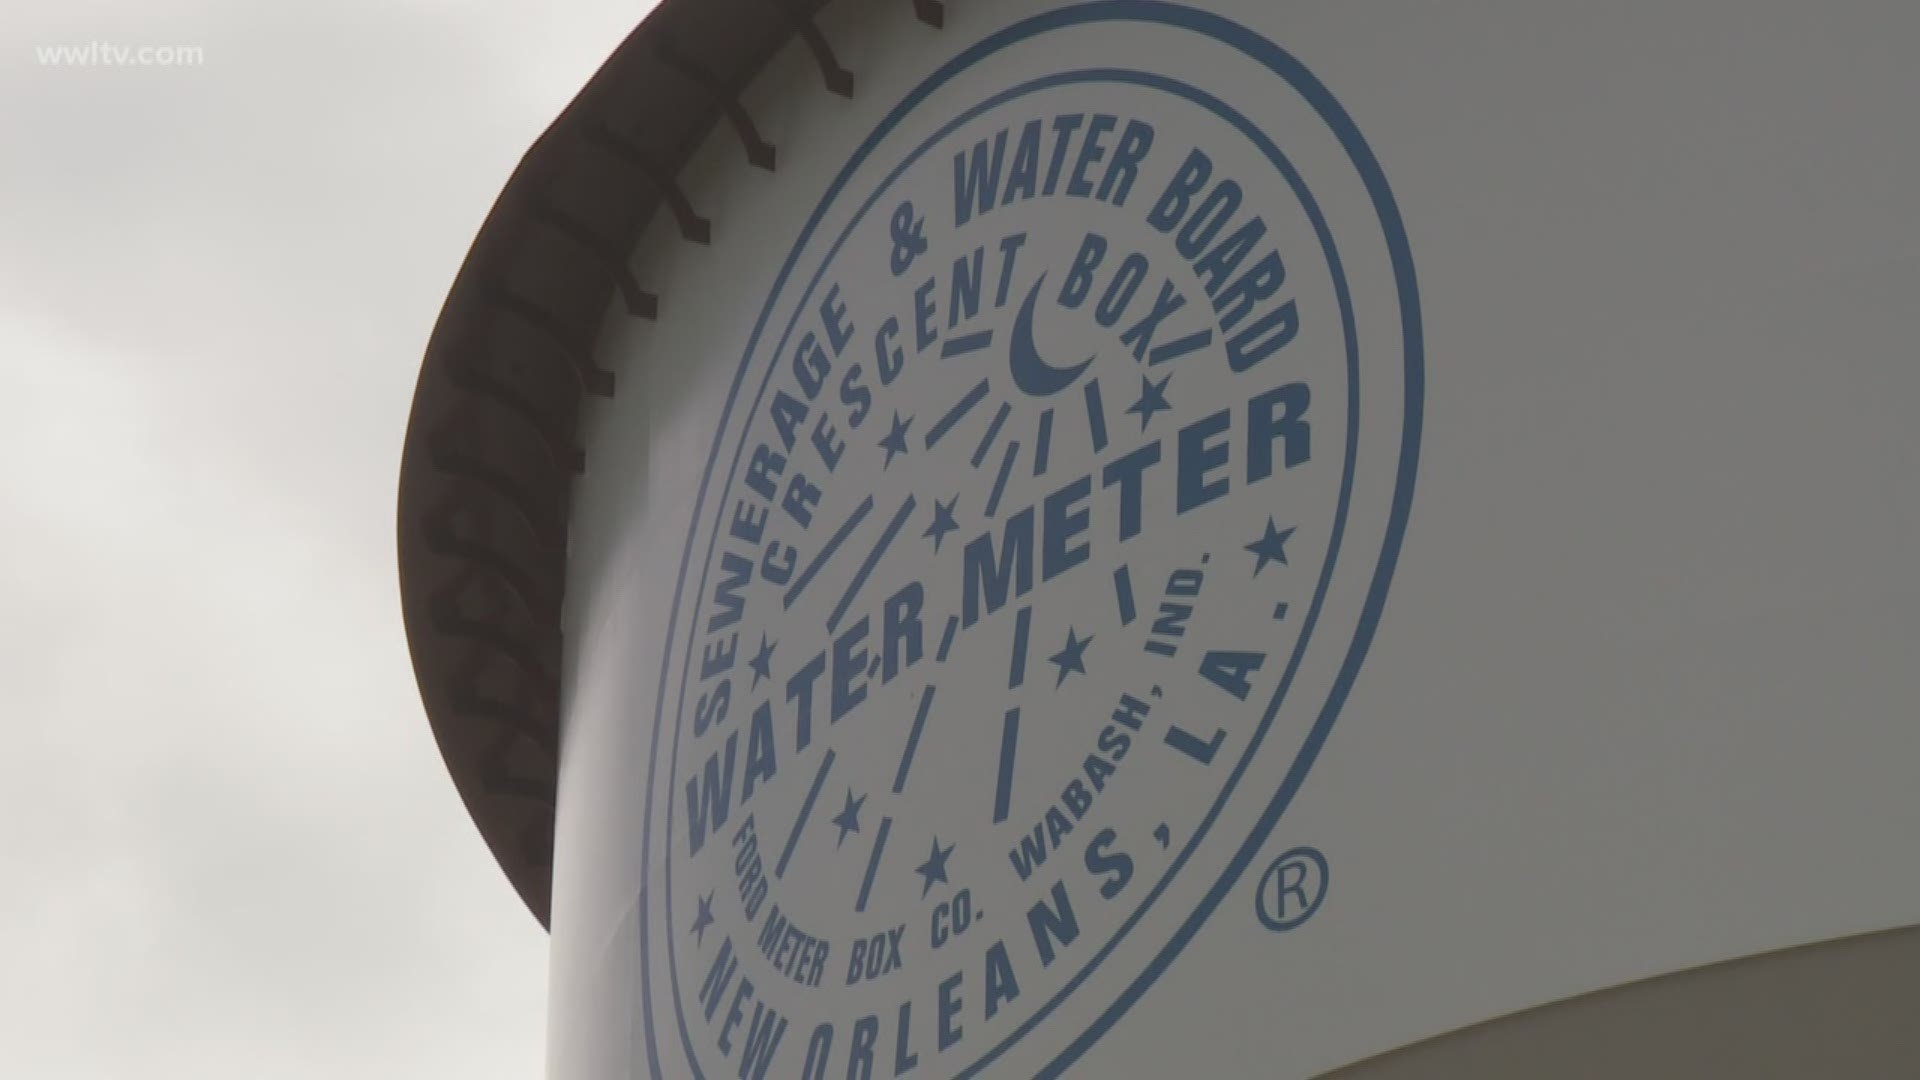 The S&WB announced last Wednesday that an $80 million water tower was available to keep pressure up if pumps went out.